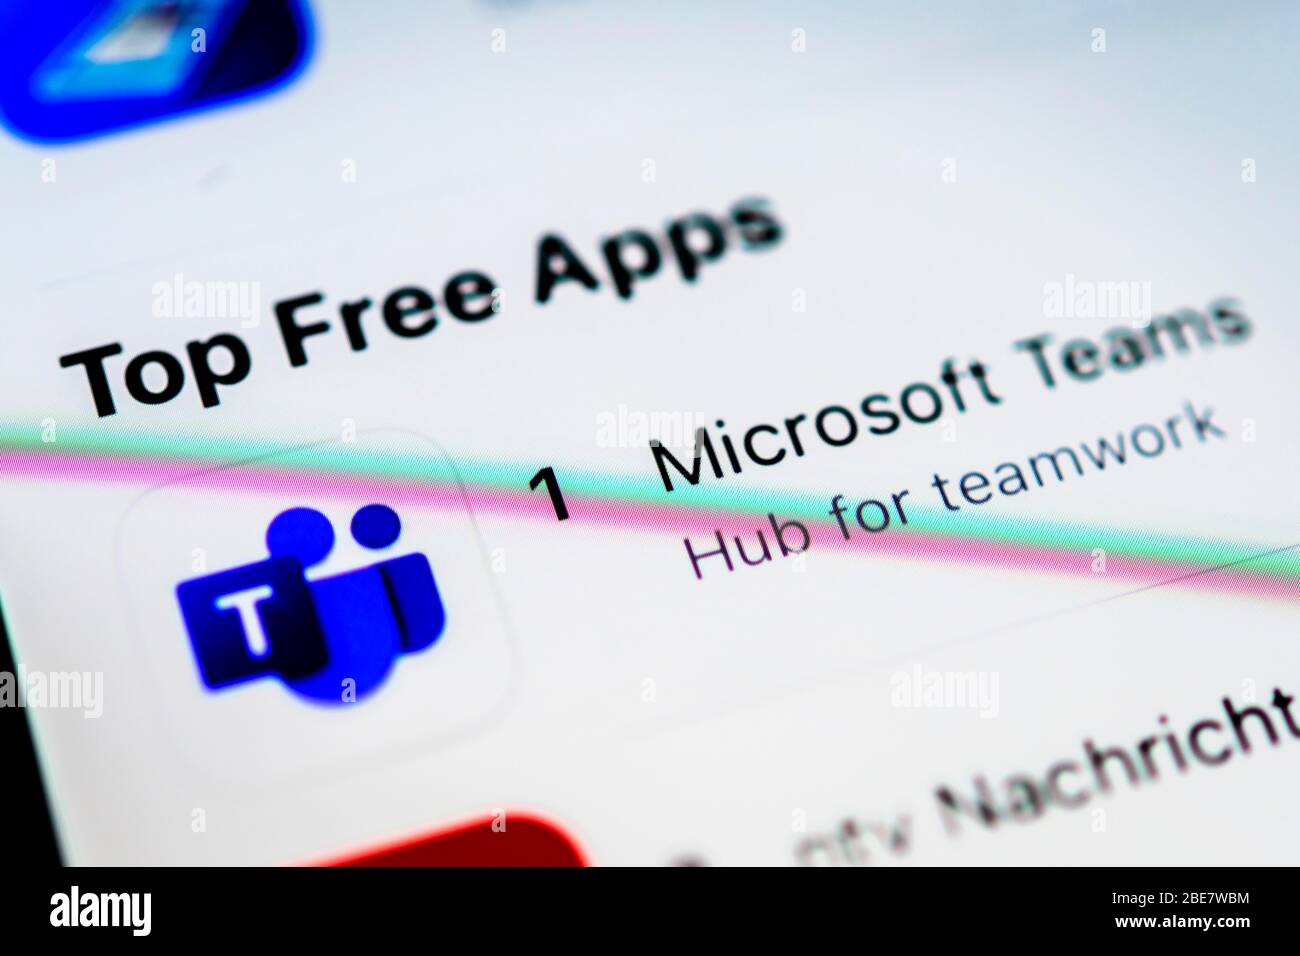 Microsoft Teams App, video conference service, app icon, display on mobile phone, smartphone, detail, full screen Stock Photo